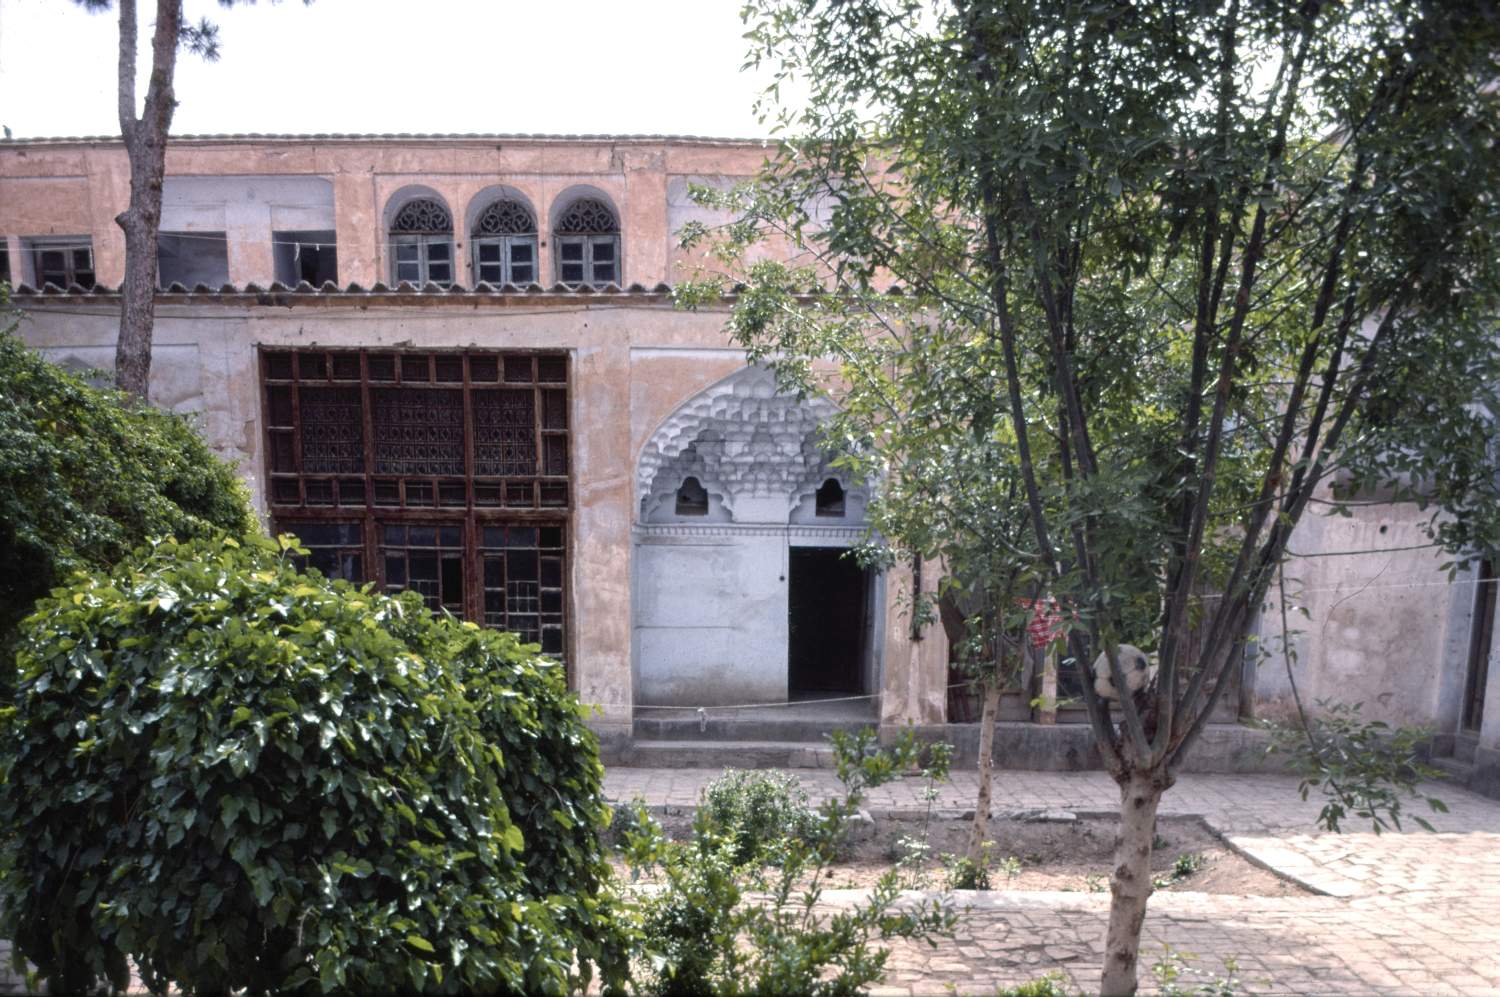 View of eastern facade of courtyard from west side, showing set of three wood-framed windows and muqarnas-vaulted recessed entryway.